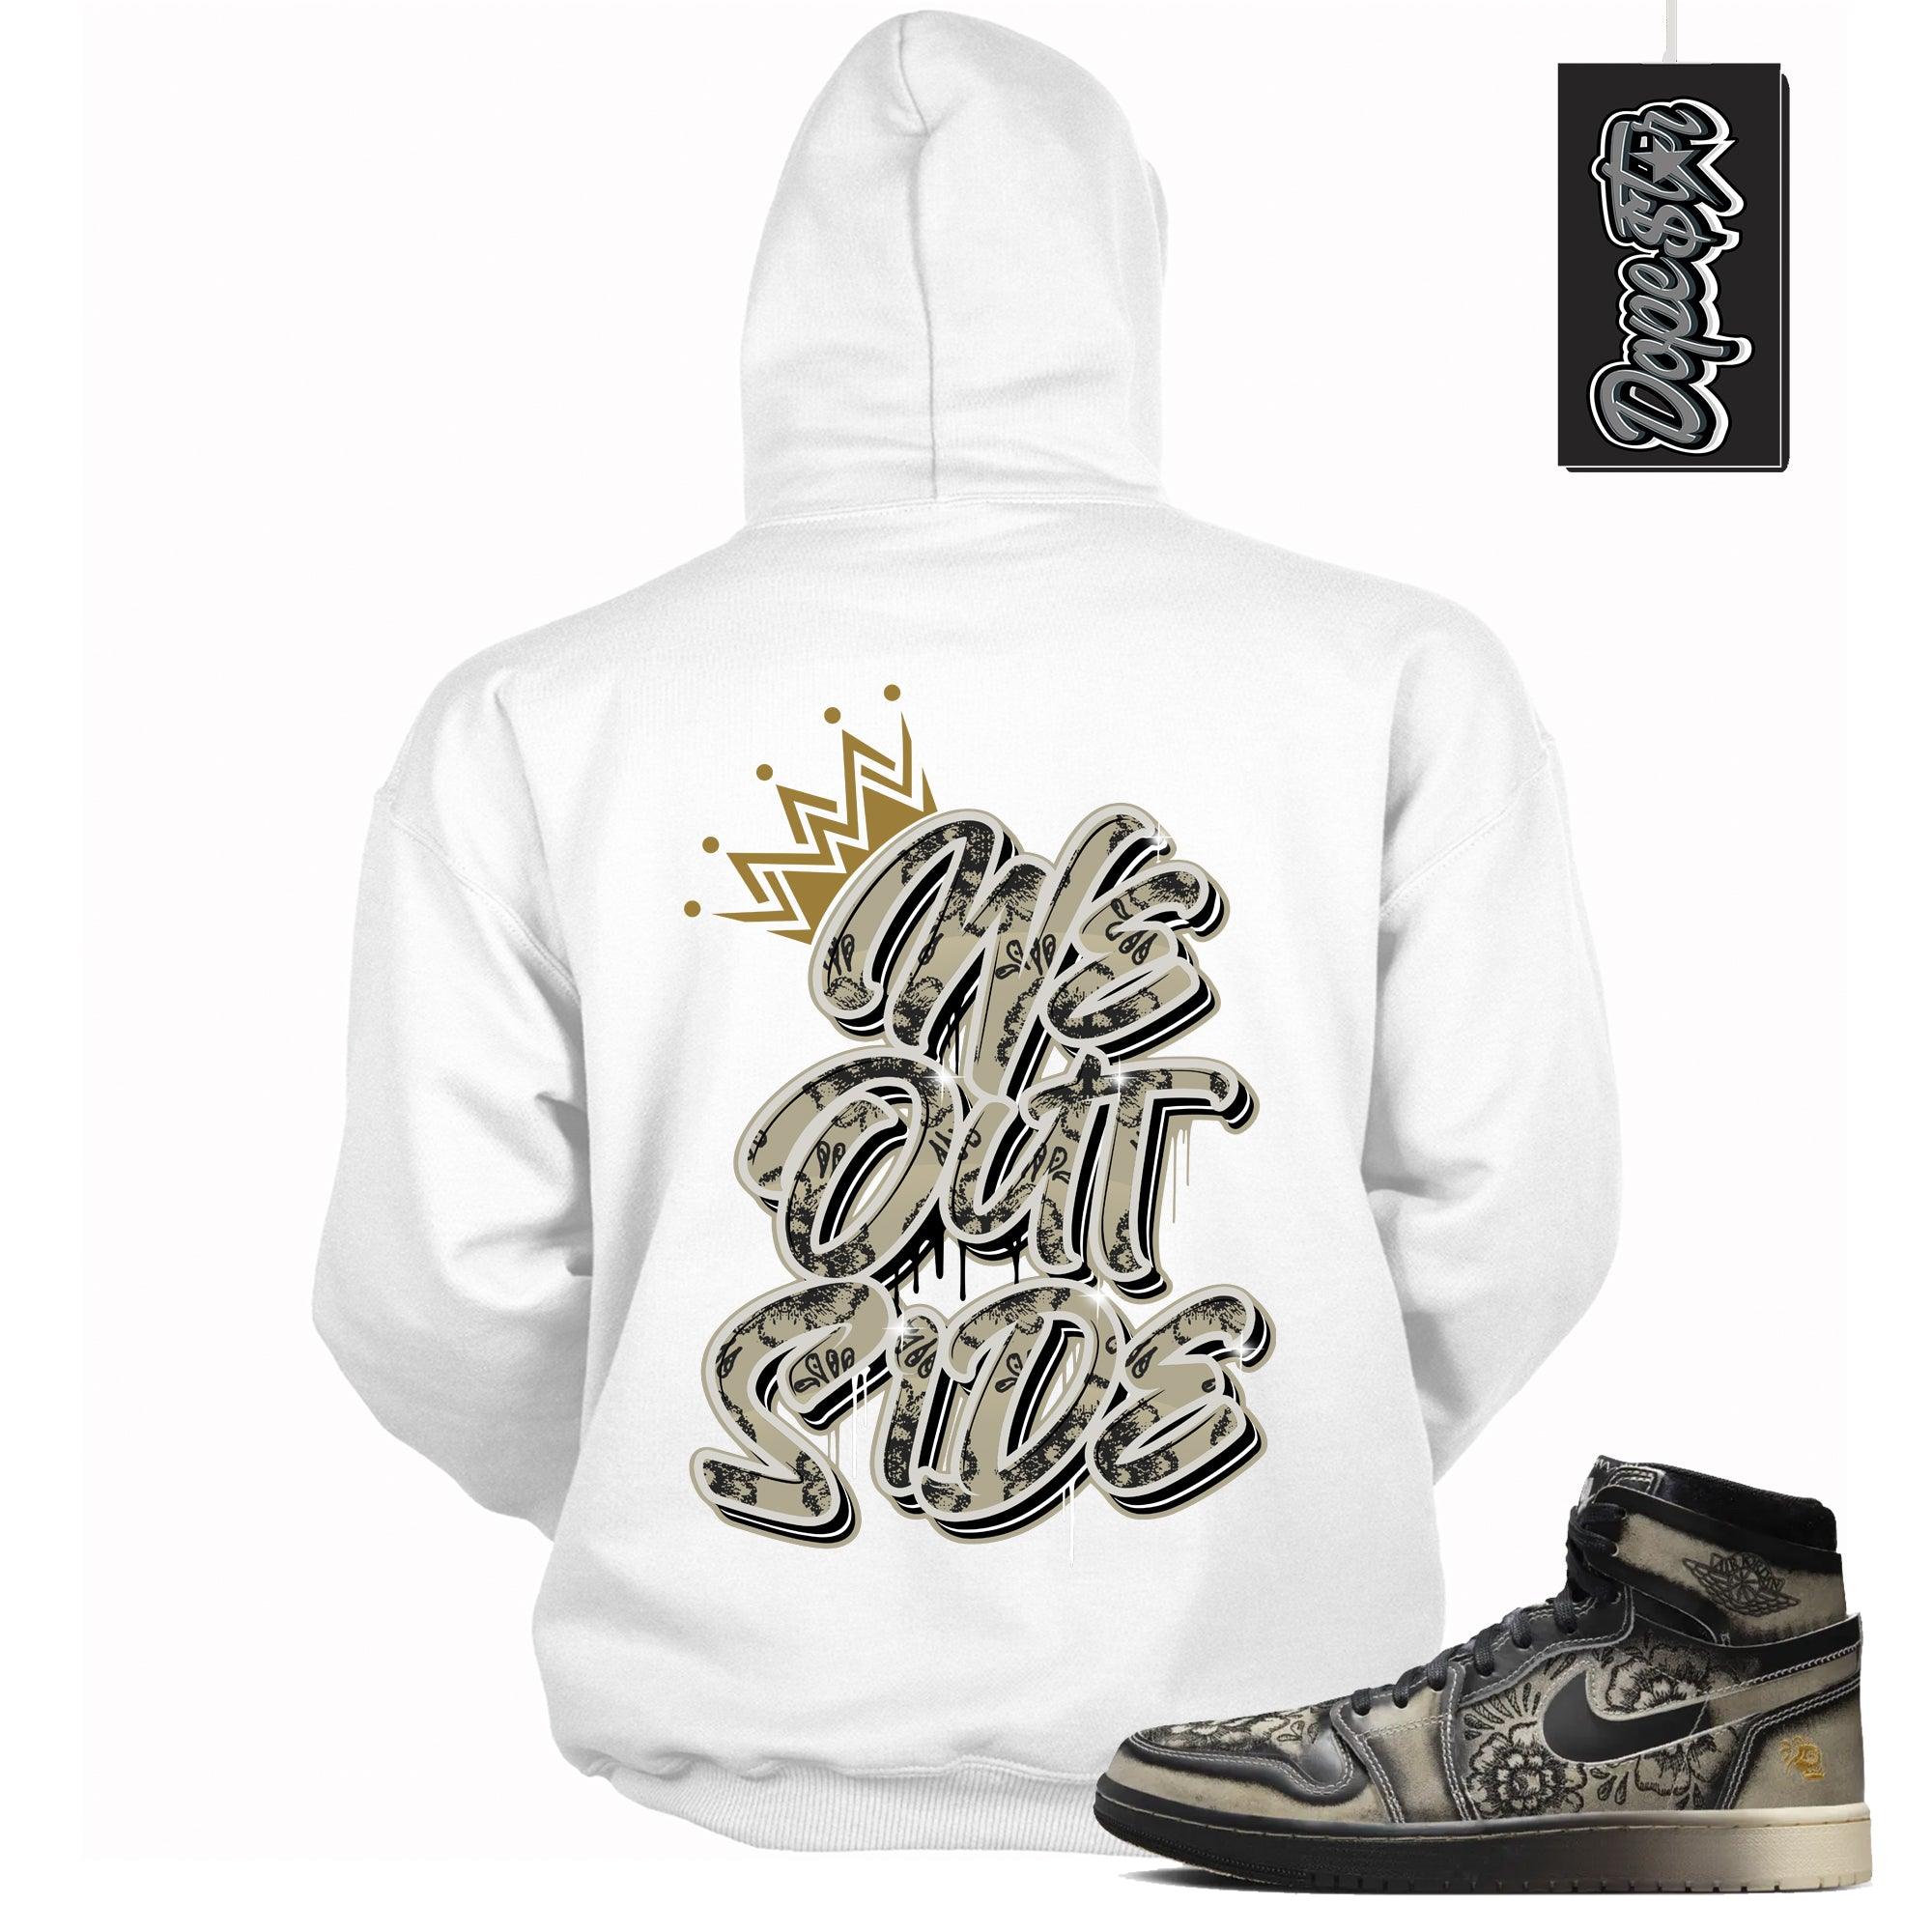 Cool White Graphic Hoodie with “ We Outside “ print, that perfectly matches Air Jordan 1 High Zoom Comfort 2 Dia de Muertos Black and Pale lvory sneakers